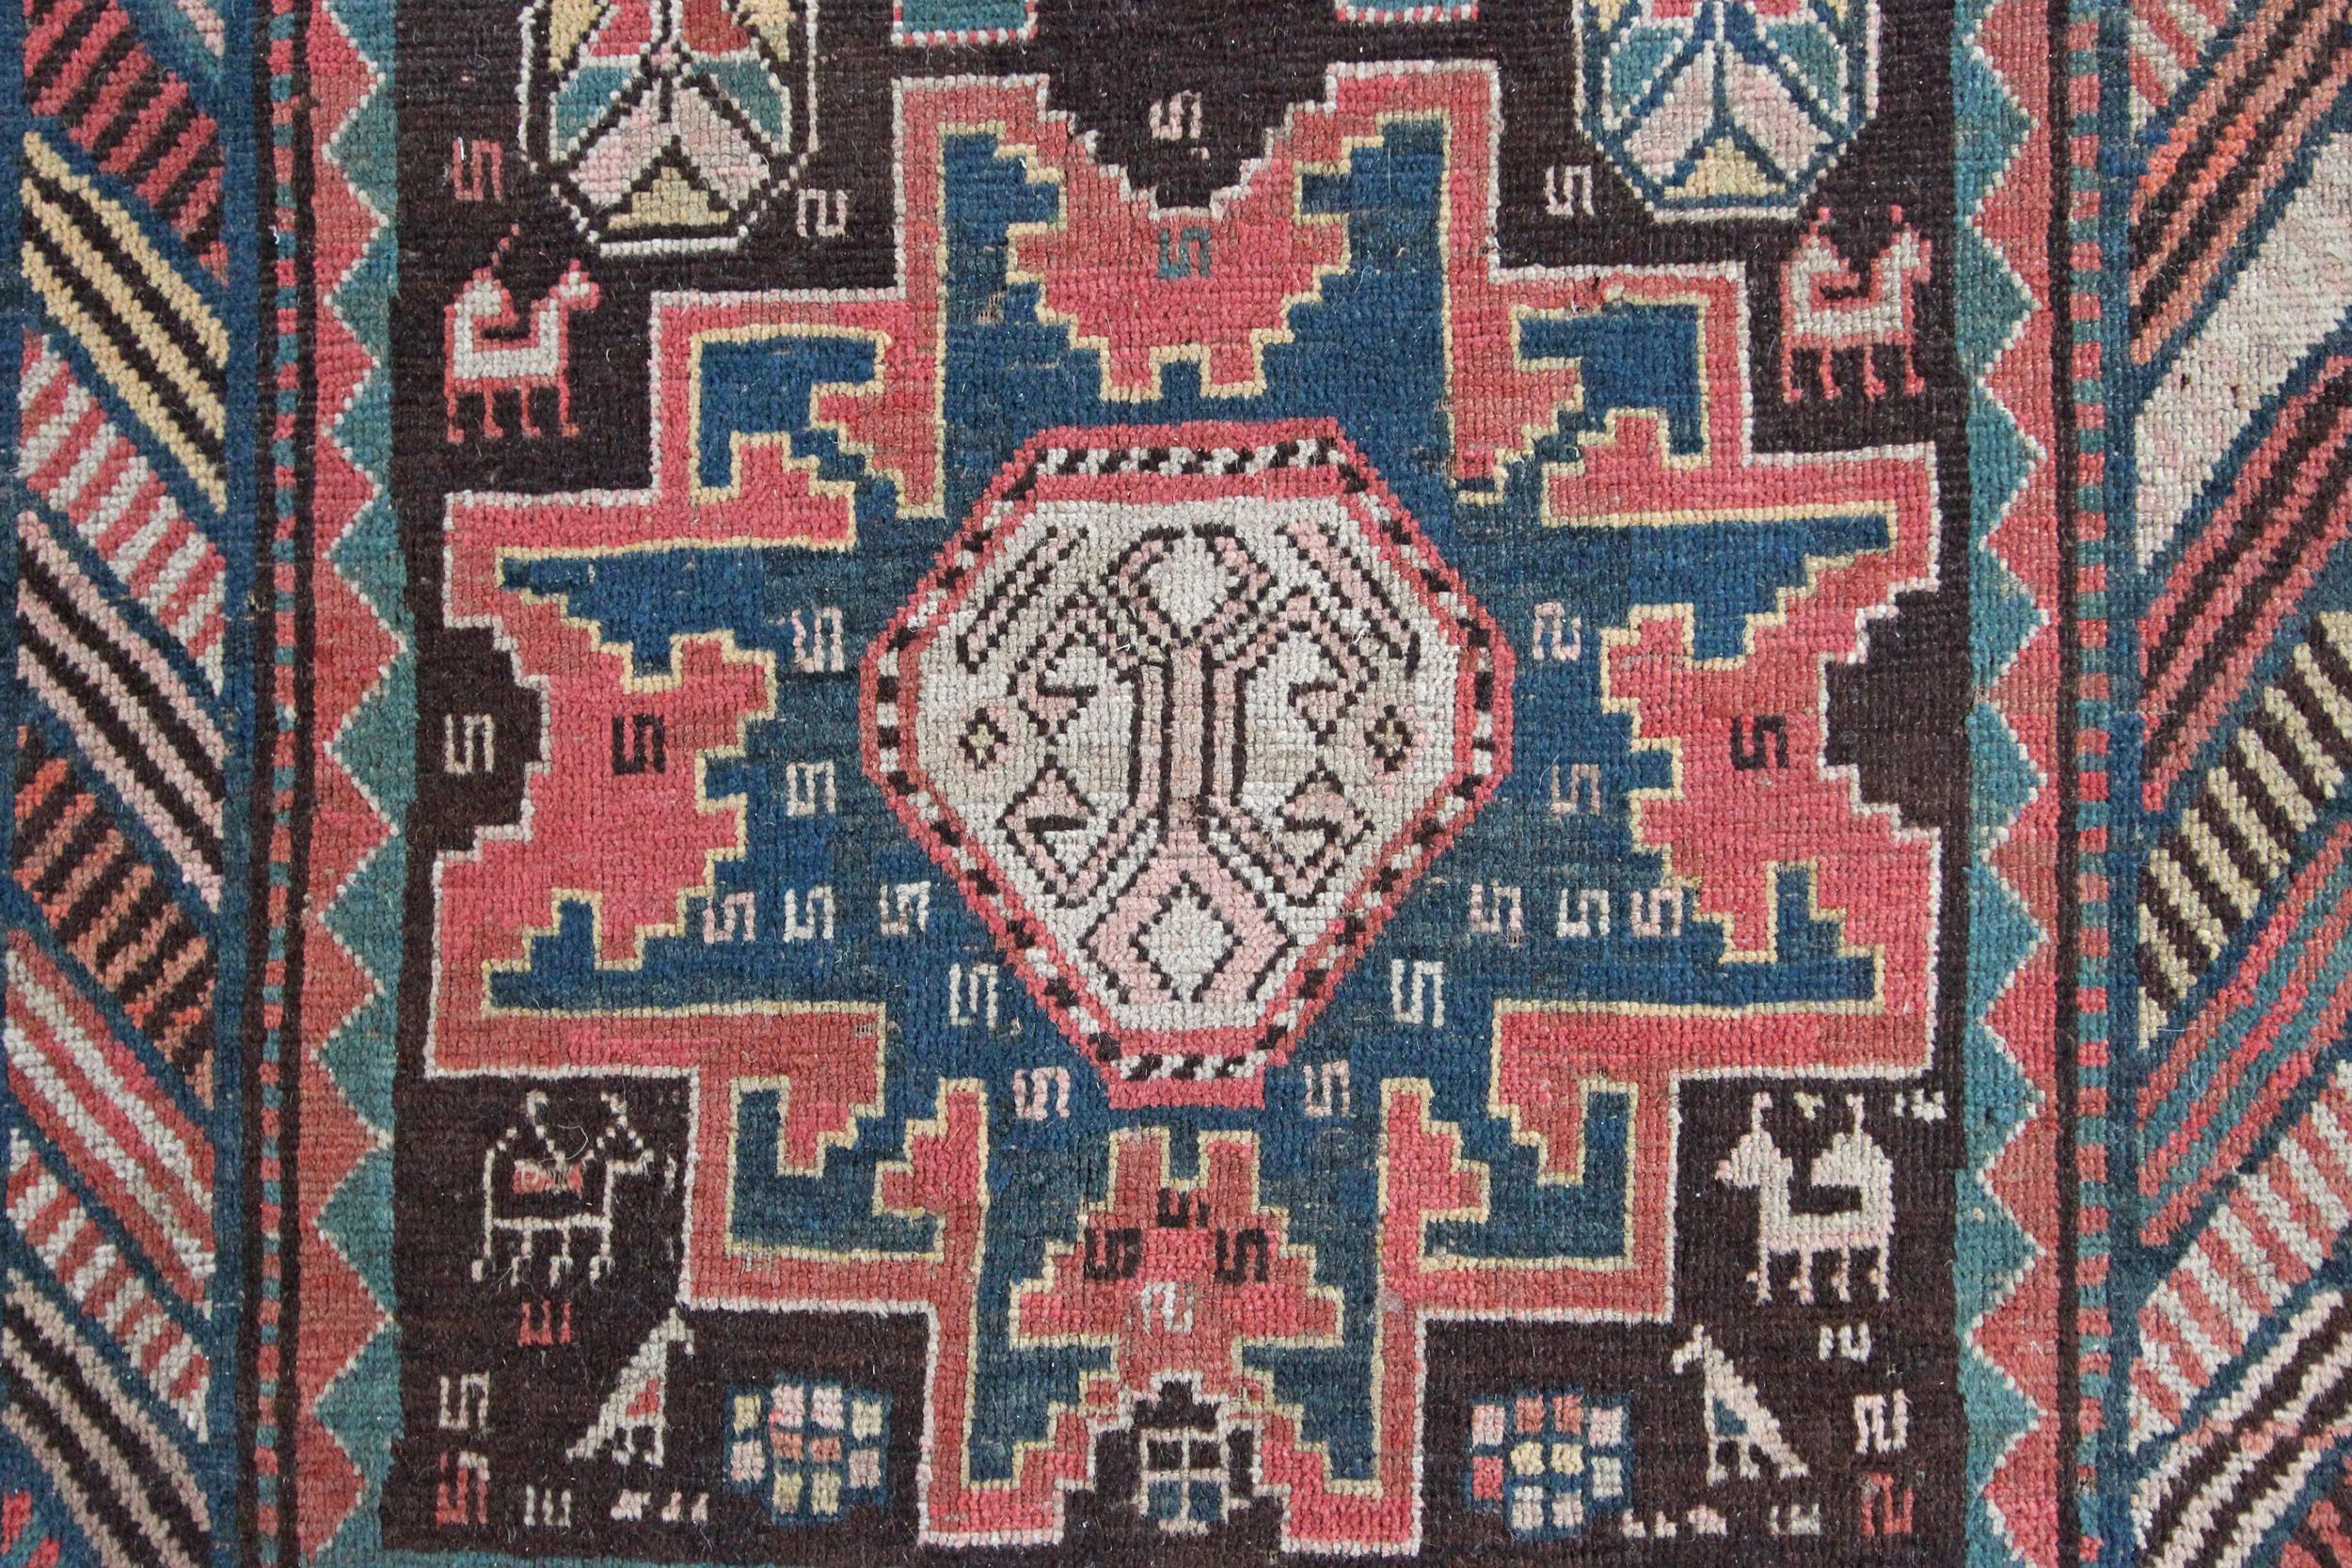 A beautiful soft and decorative antique Kazak kelleh rug, with a five-star design we see in Lesghi Caucasian rugs. Dating from the late 19th century the condition is good with generally a nice wool pile throughout. The fringes are short but no